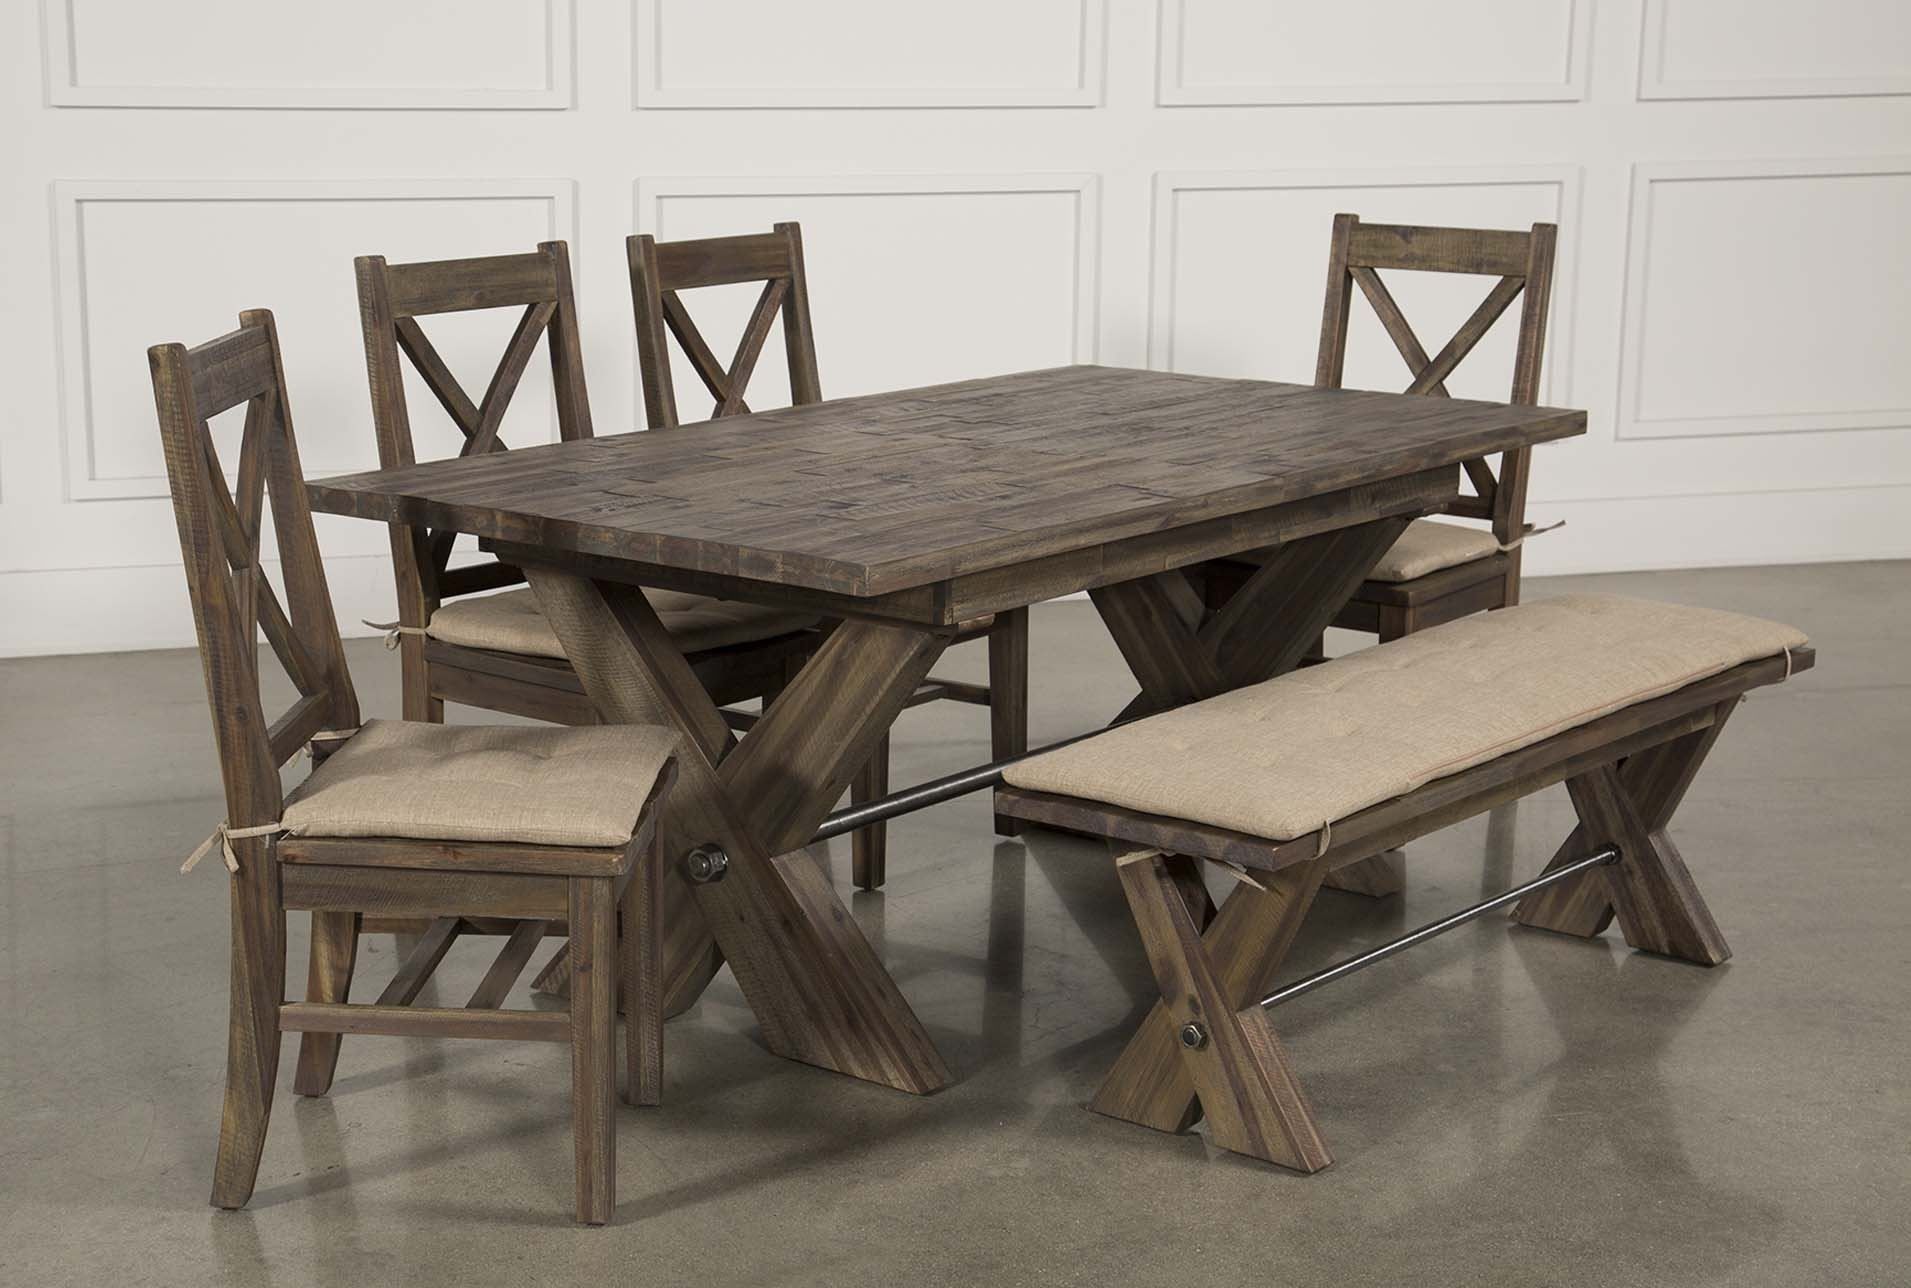 Mallard 6 Piece Extension Dining Set | Fish Project | Pinterest Intended For Most Up To Date Mallard 6 Piece Extension Dining Sets (Photo 1 of 20)